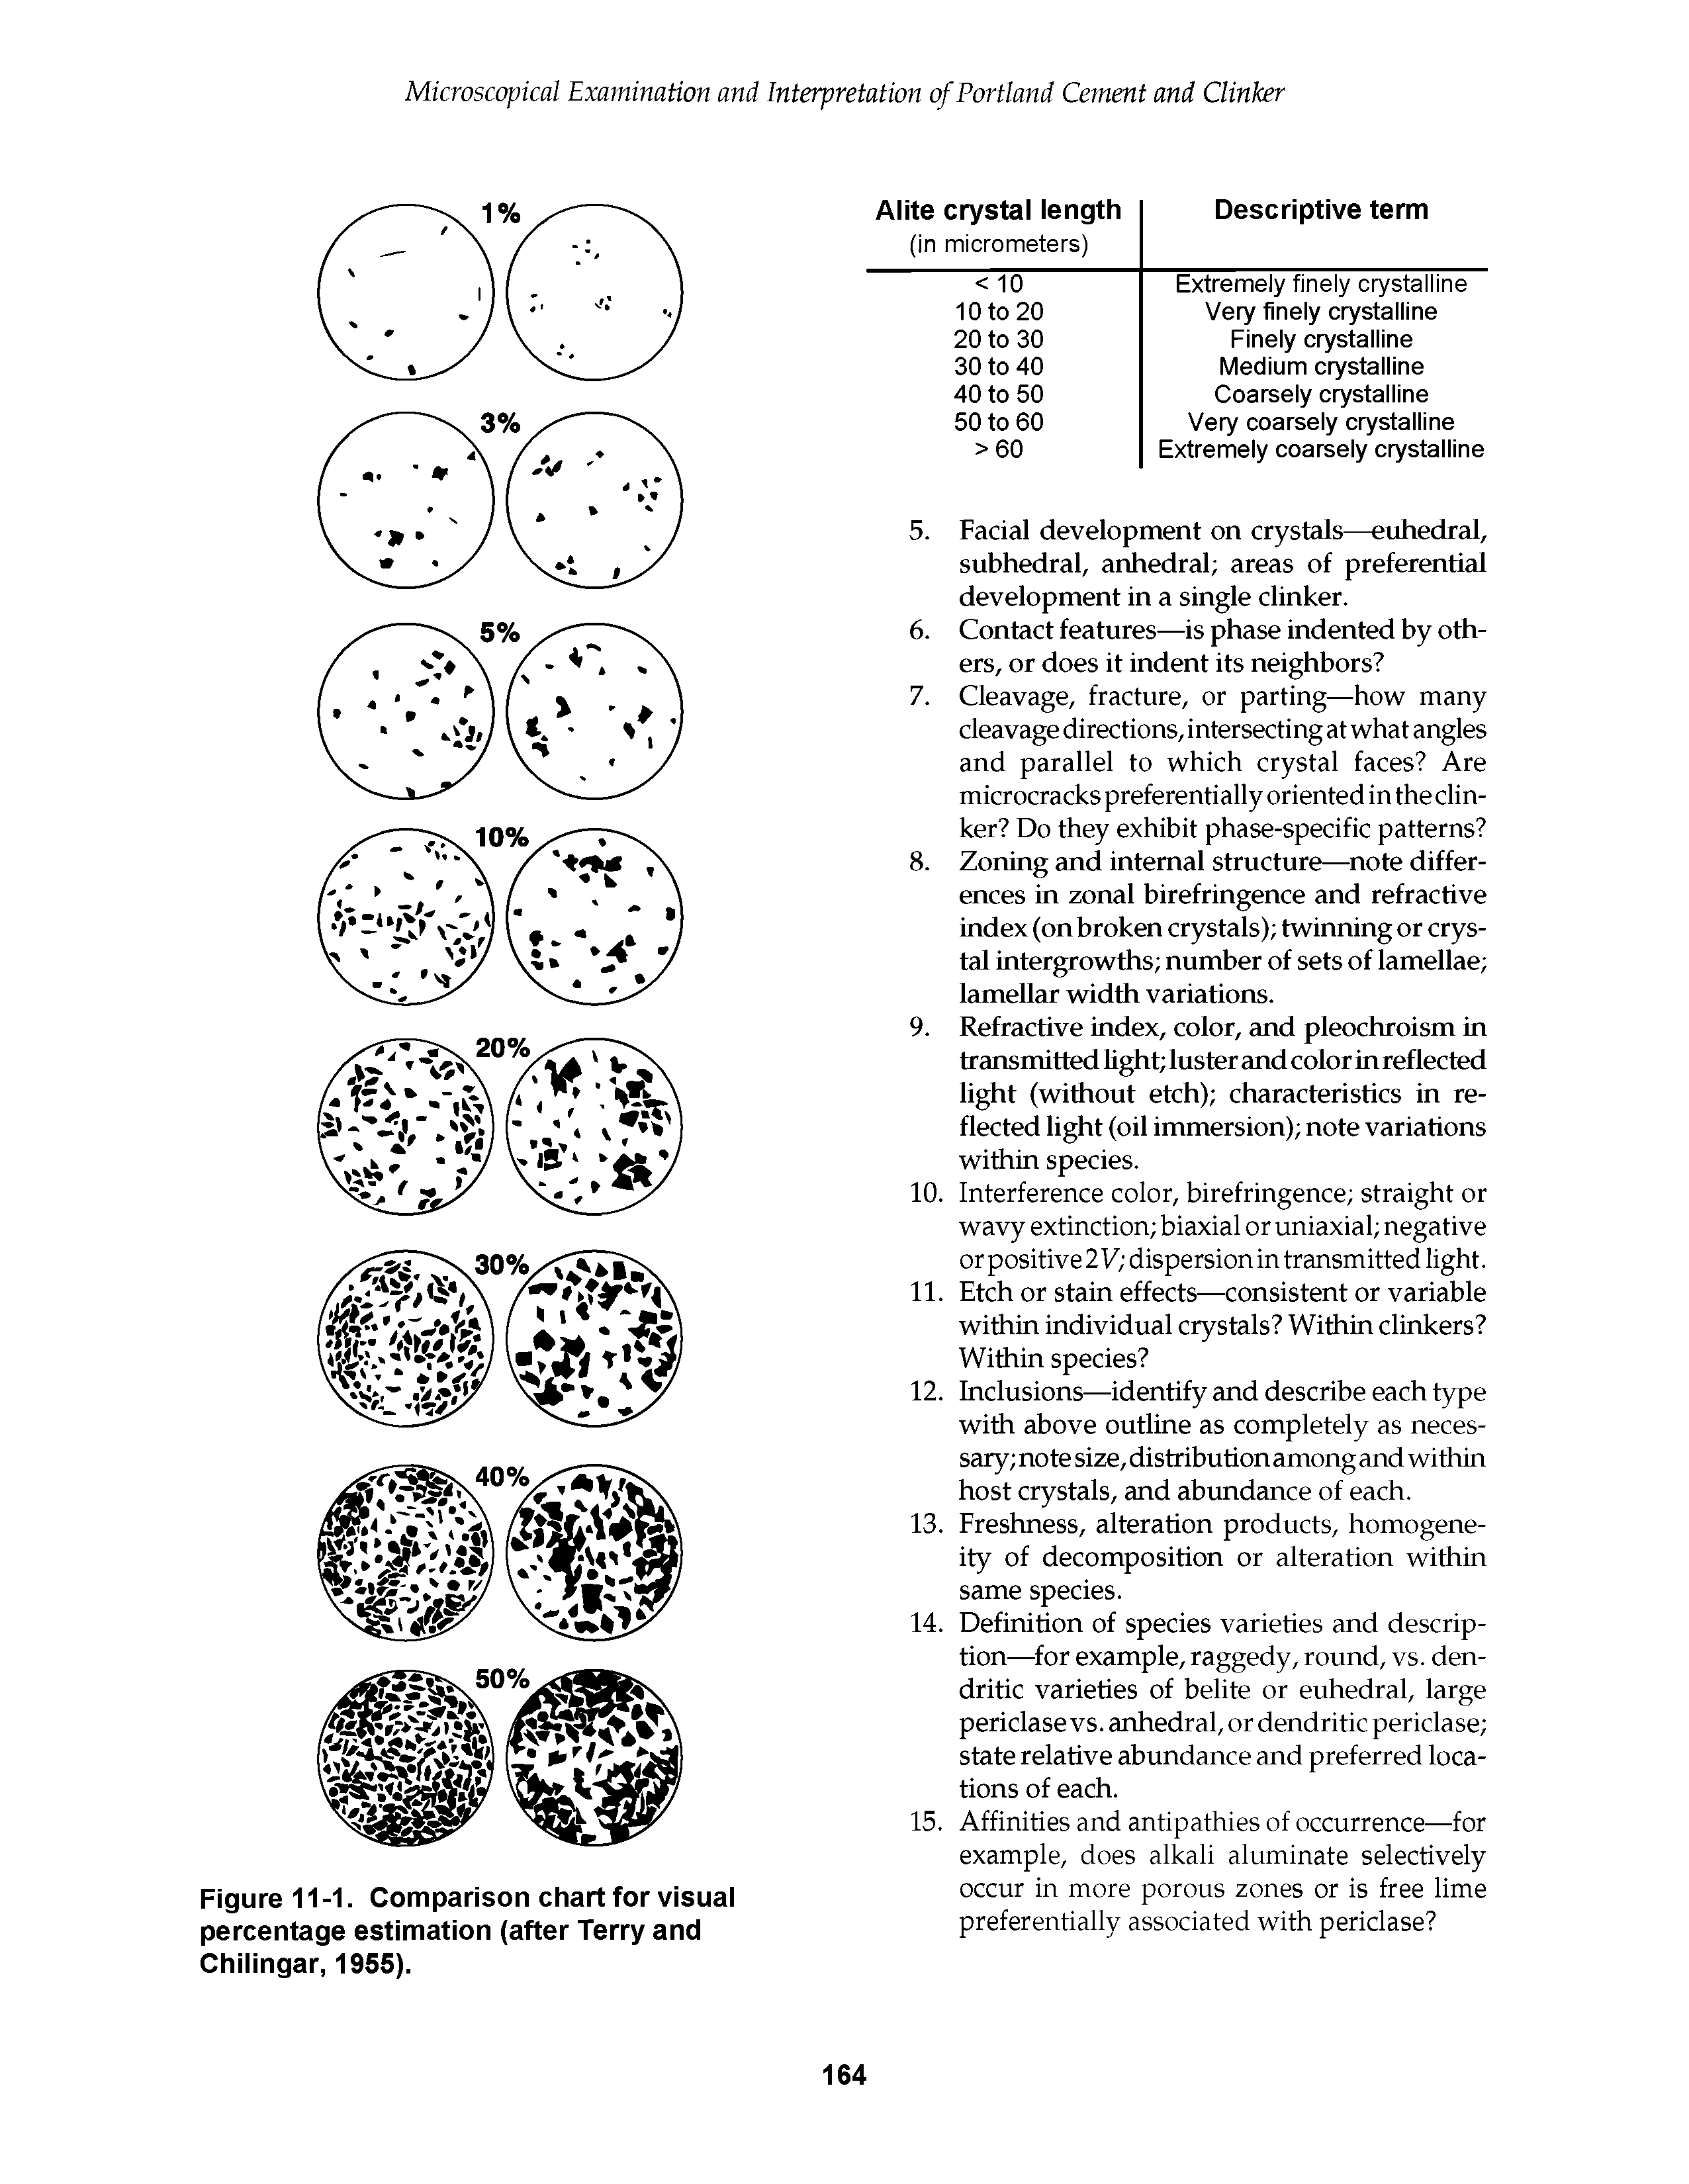 Figure 11-1. Comparison chart for visuai percentage estimation (after Terry and Chiiingar, 1955).